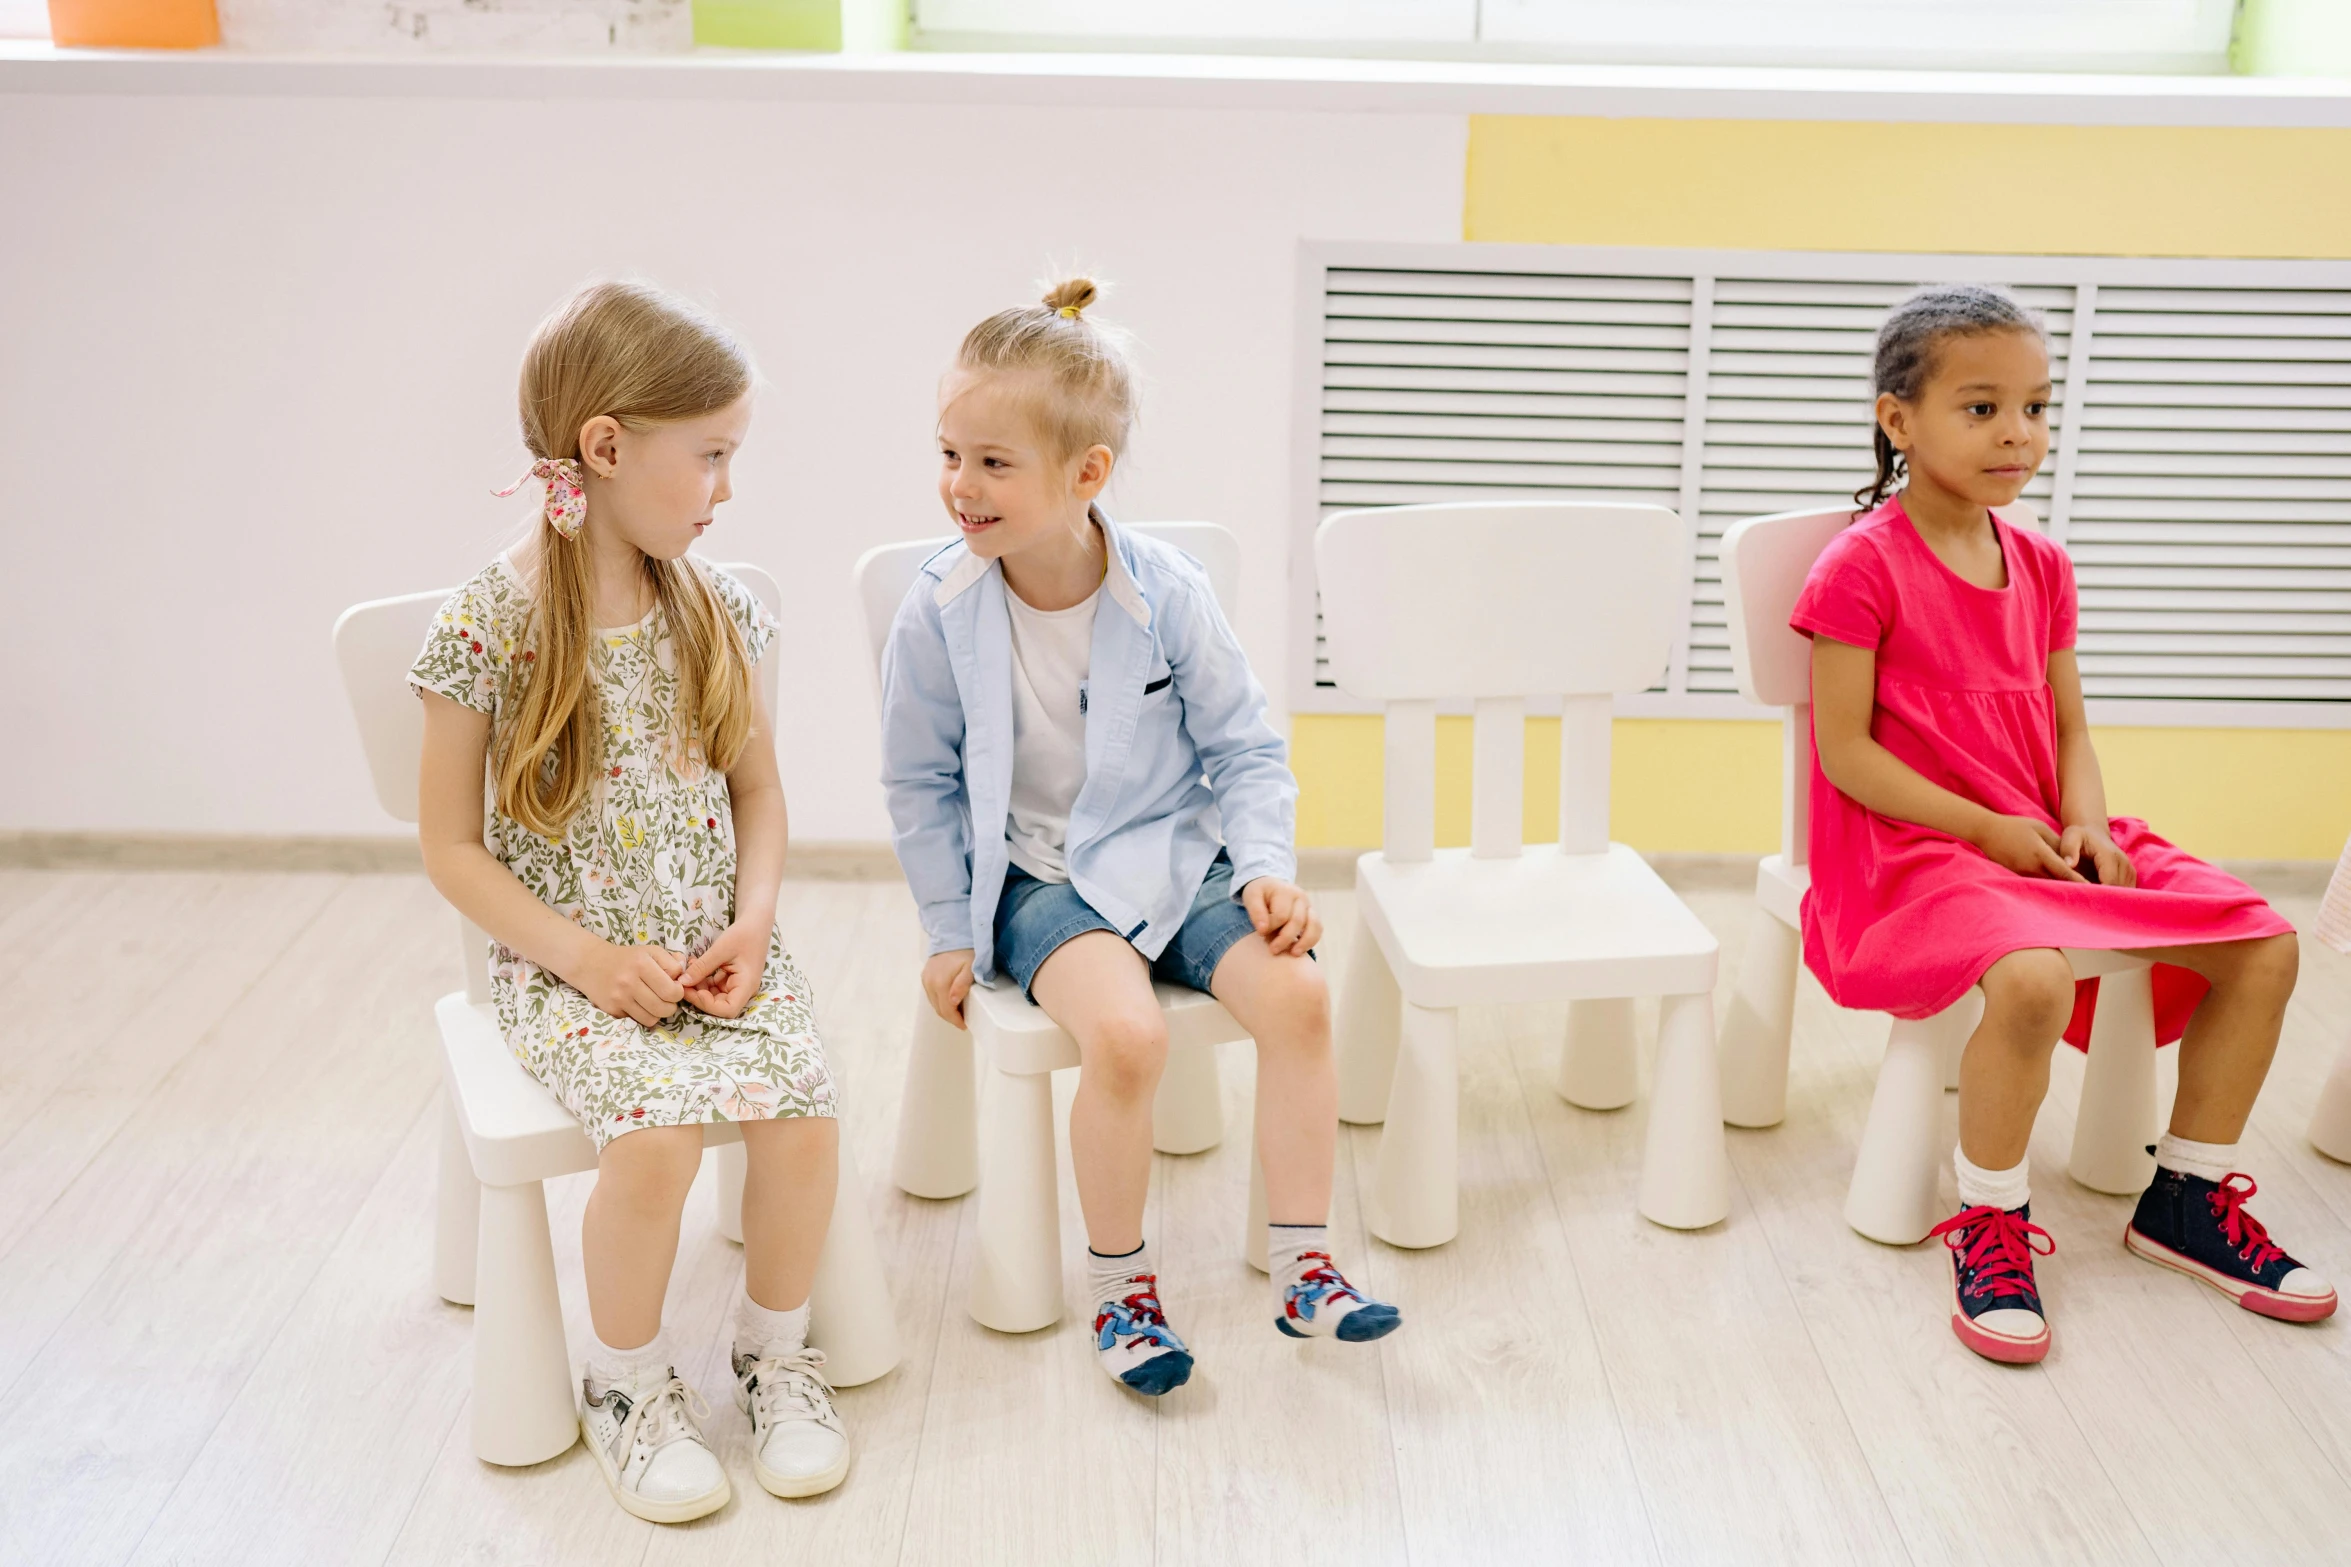 a group of children sitting on chairs in a room, on a white table, 15081959 21121991 01012000 4k, high-quality photo, mini amphitheatre